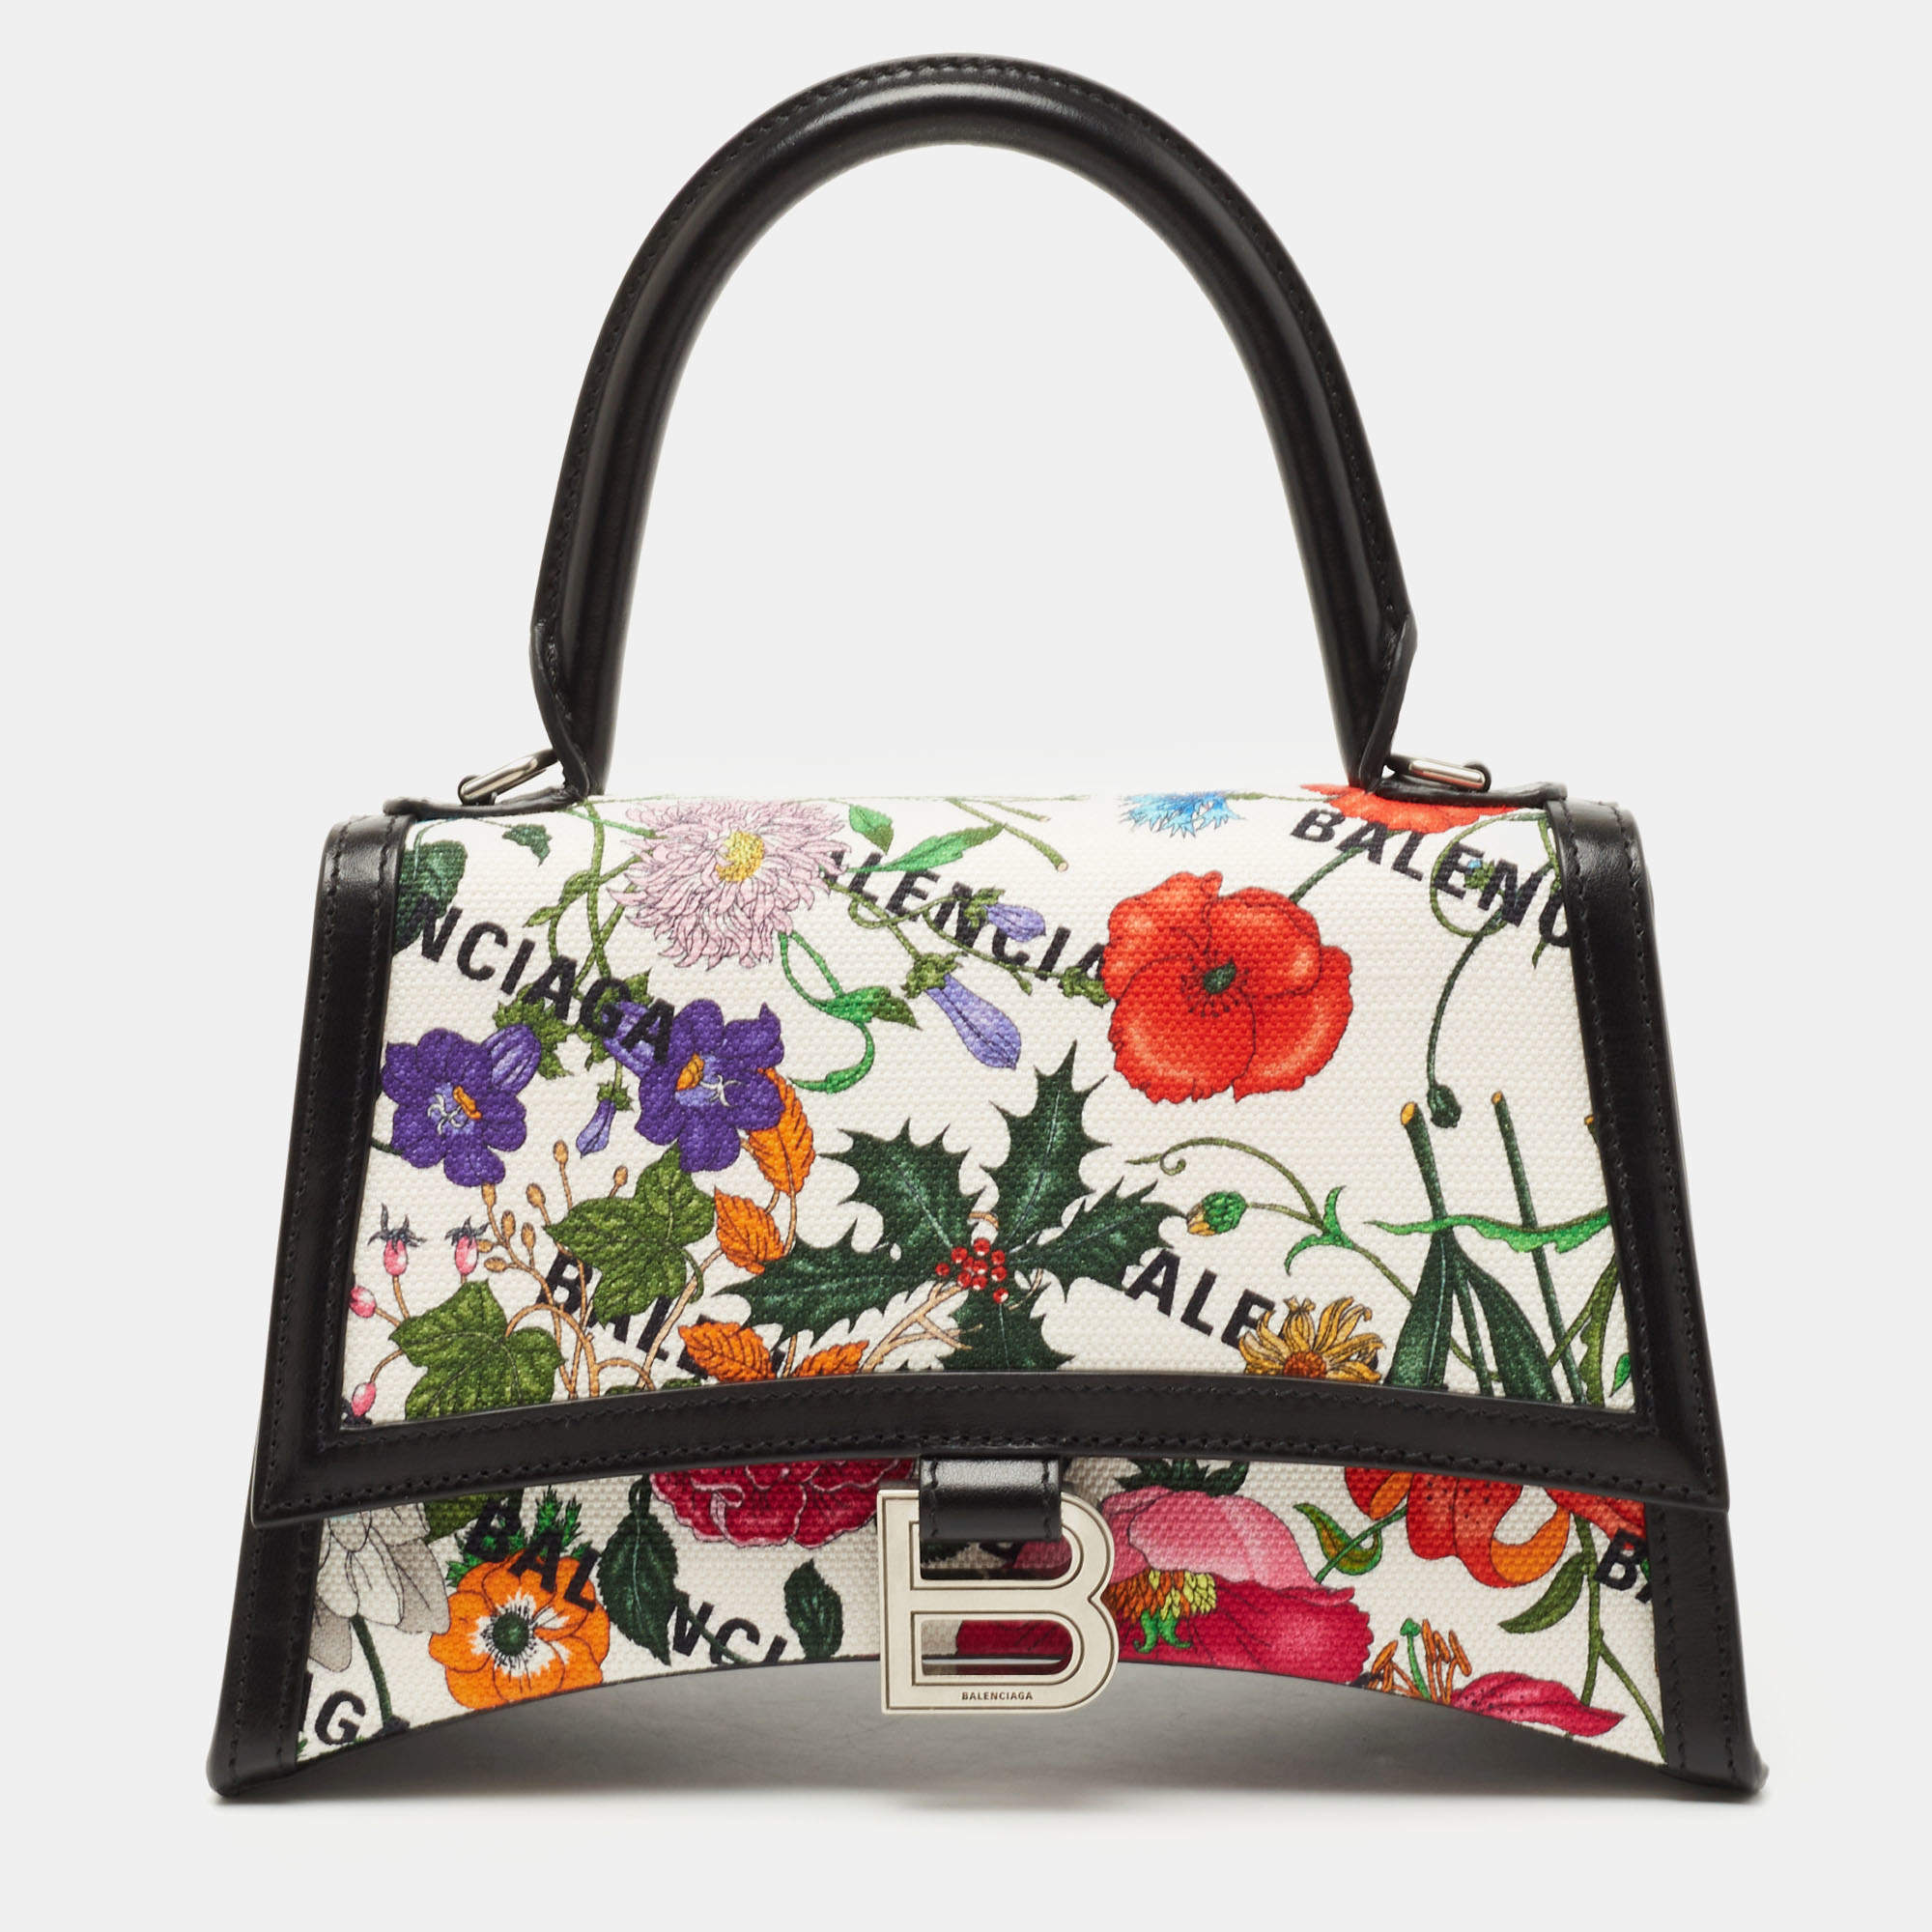 Balenciaga Bags  Handbags for Women for sale  Shop with Afterpay  eBay AU